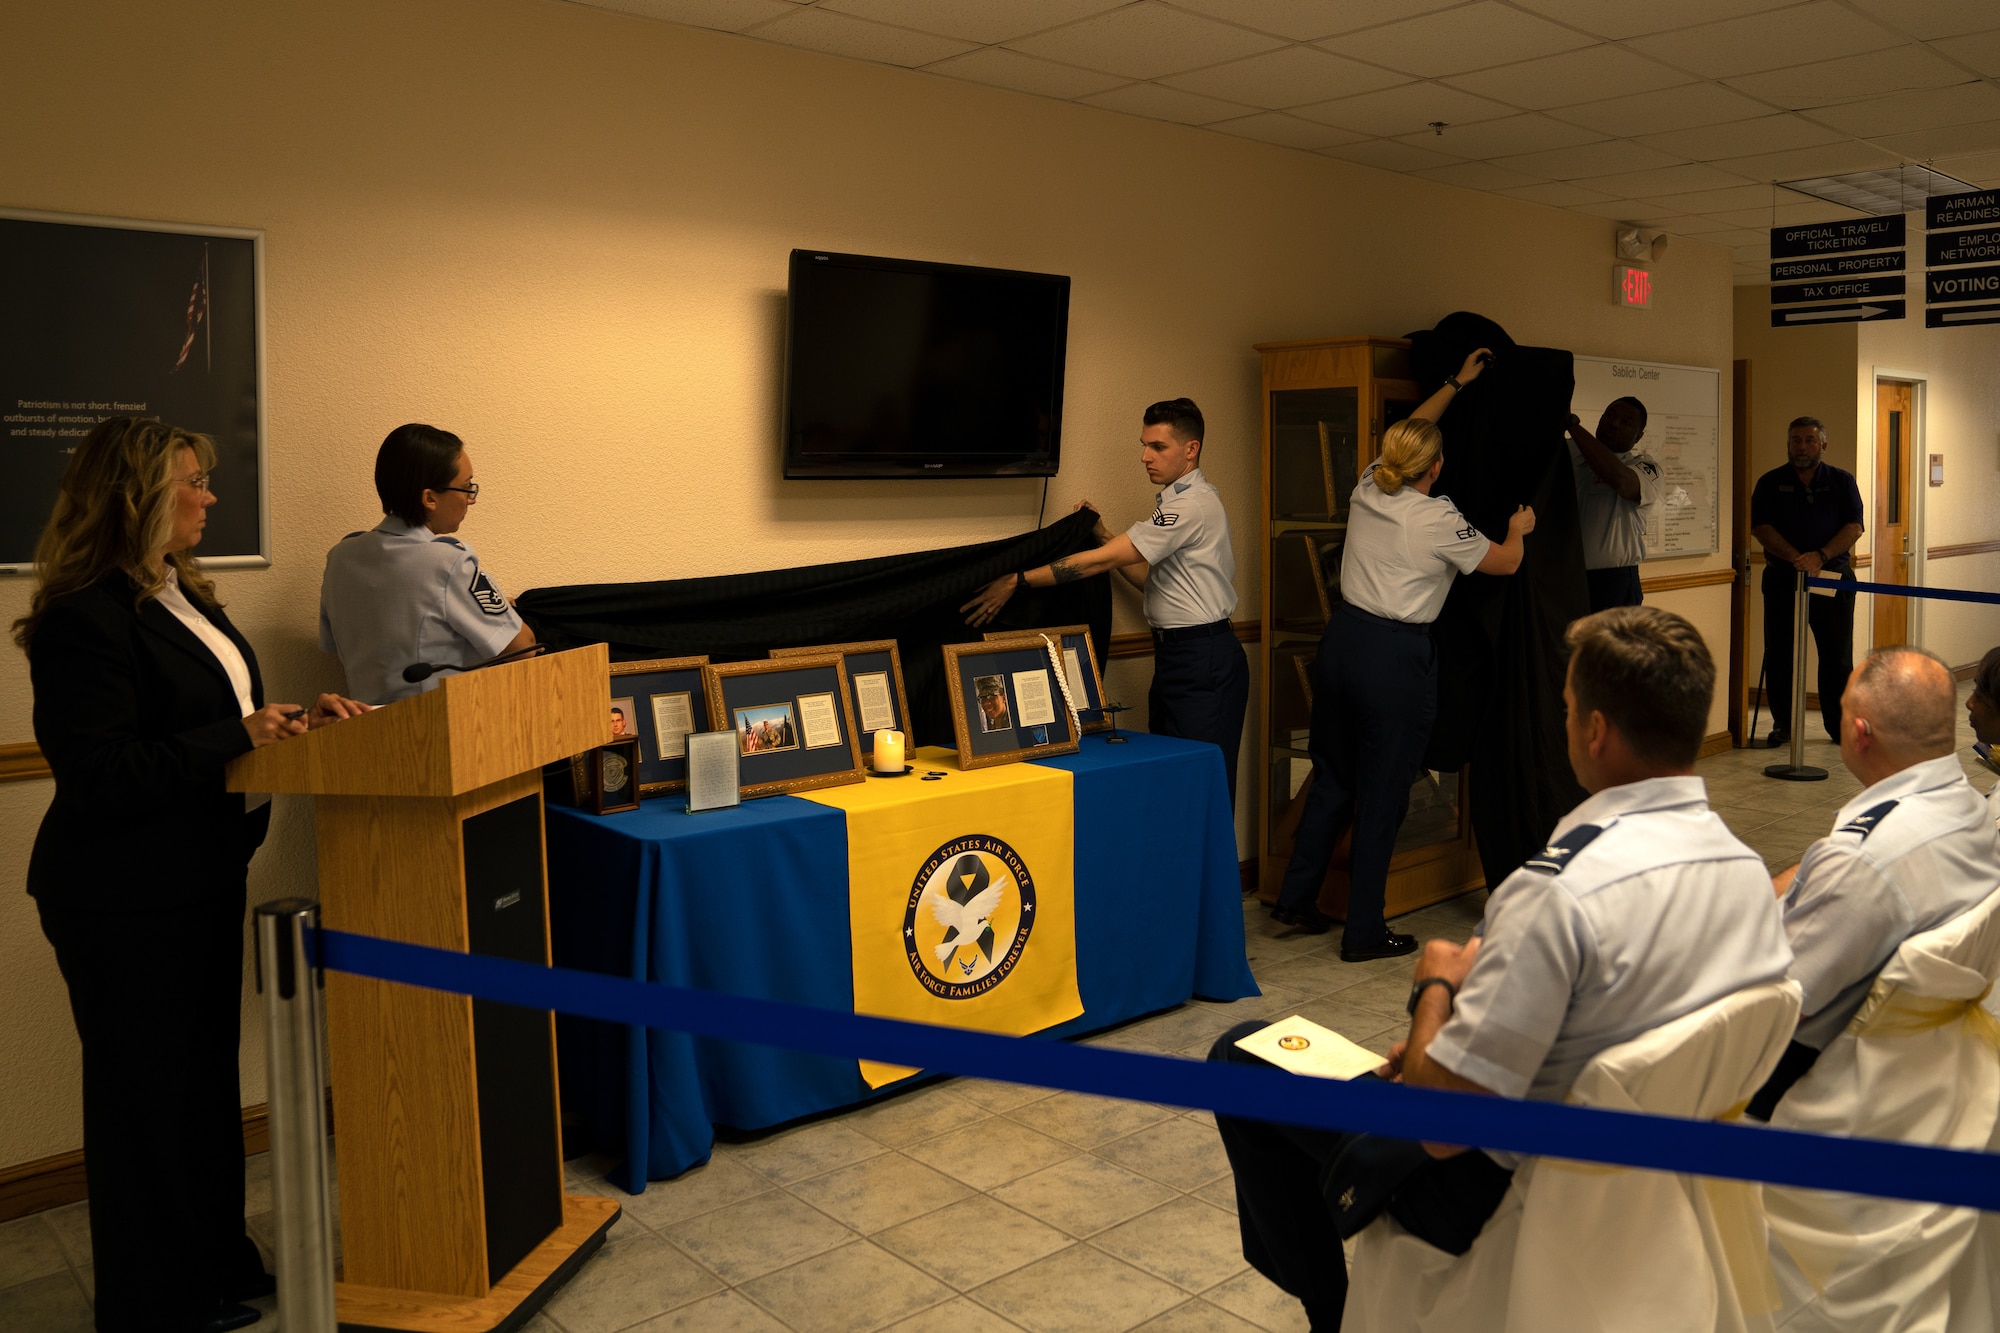 Airmen unveil the Fallen Heroes Cabinet display in the Sablich Center at Keesler Air Force Base, Mississippi, Sept. 30, 2019. The display was dedicated to Gold Star families to maintain the memory of fallen heroes and let the families know they are not forgotten. (U.S. Air Force photo by Airman 1st Class Kimberly Mueller)